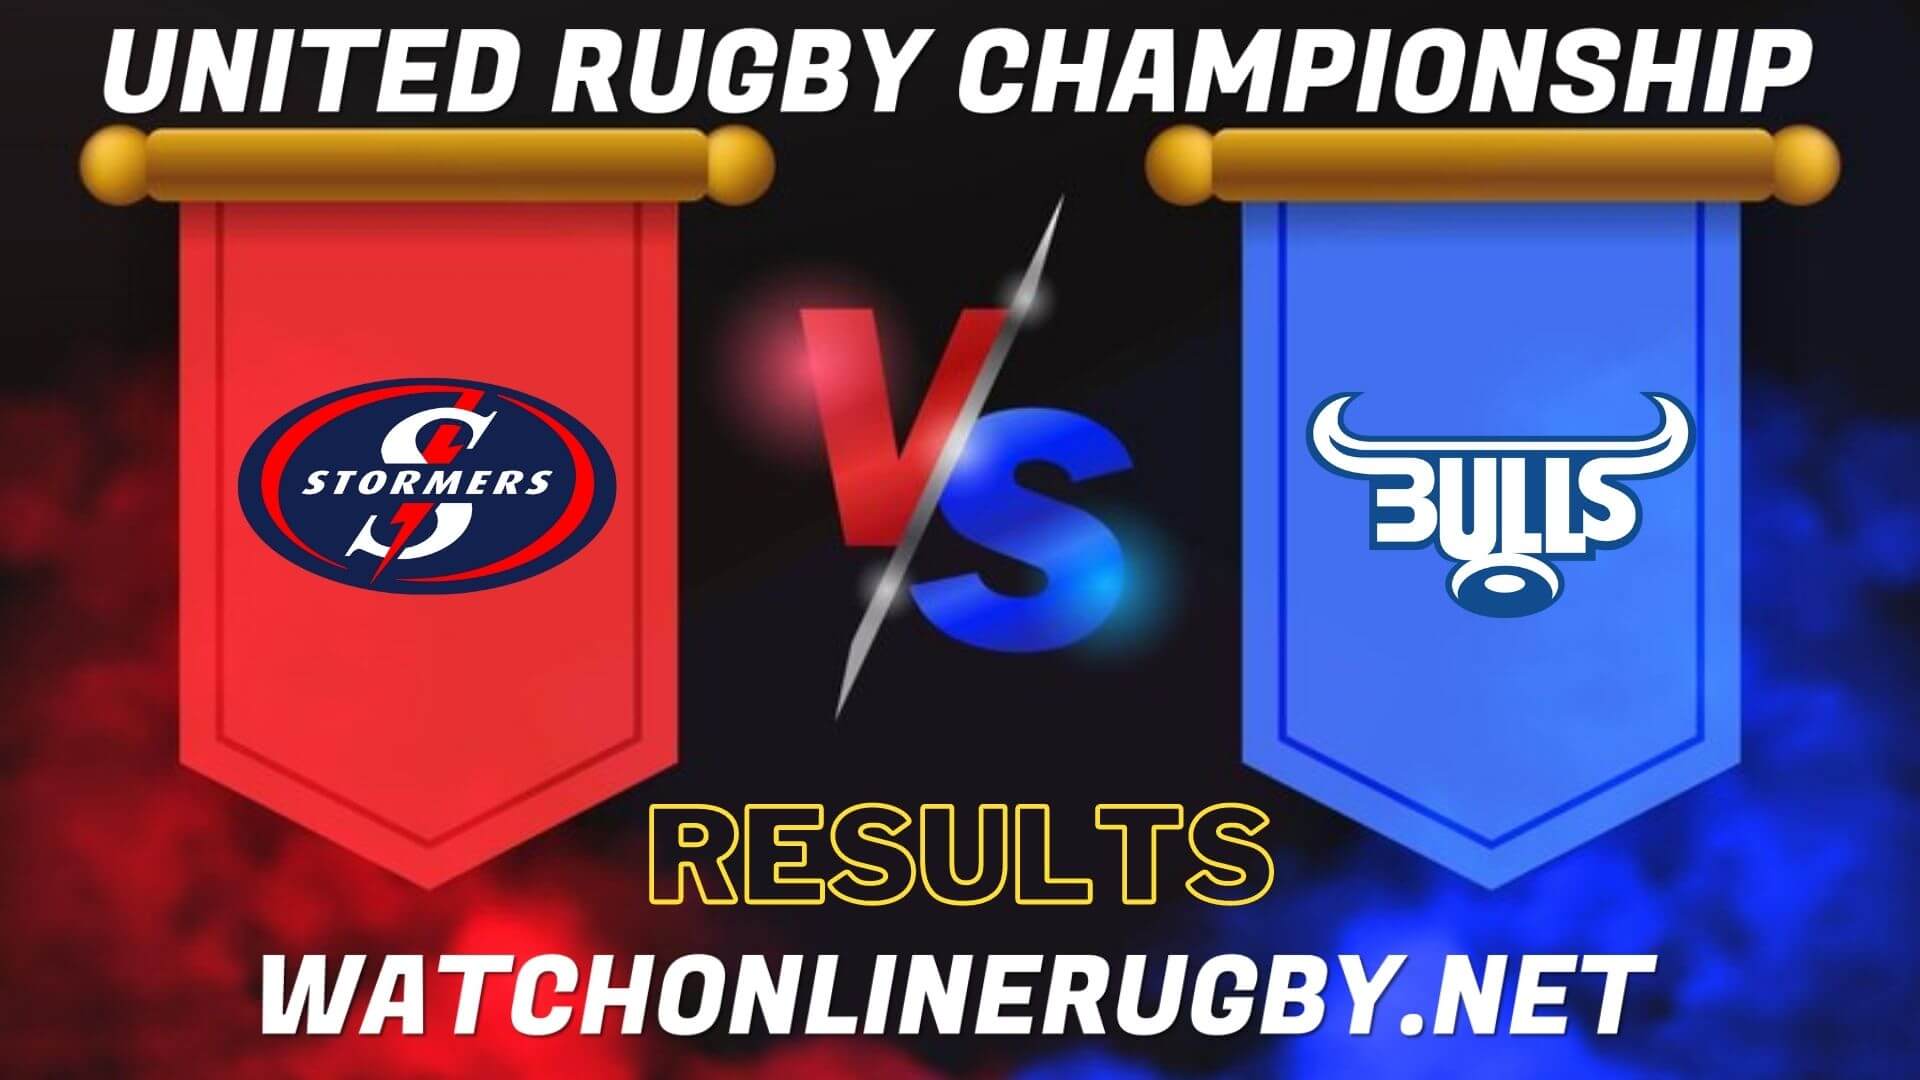 Stormers Vs Bulls United Rugby Championship 2022 RD 13